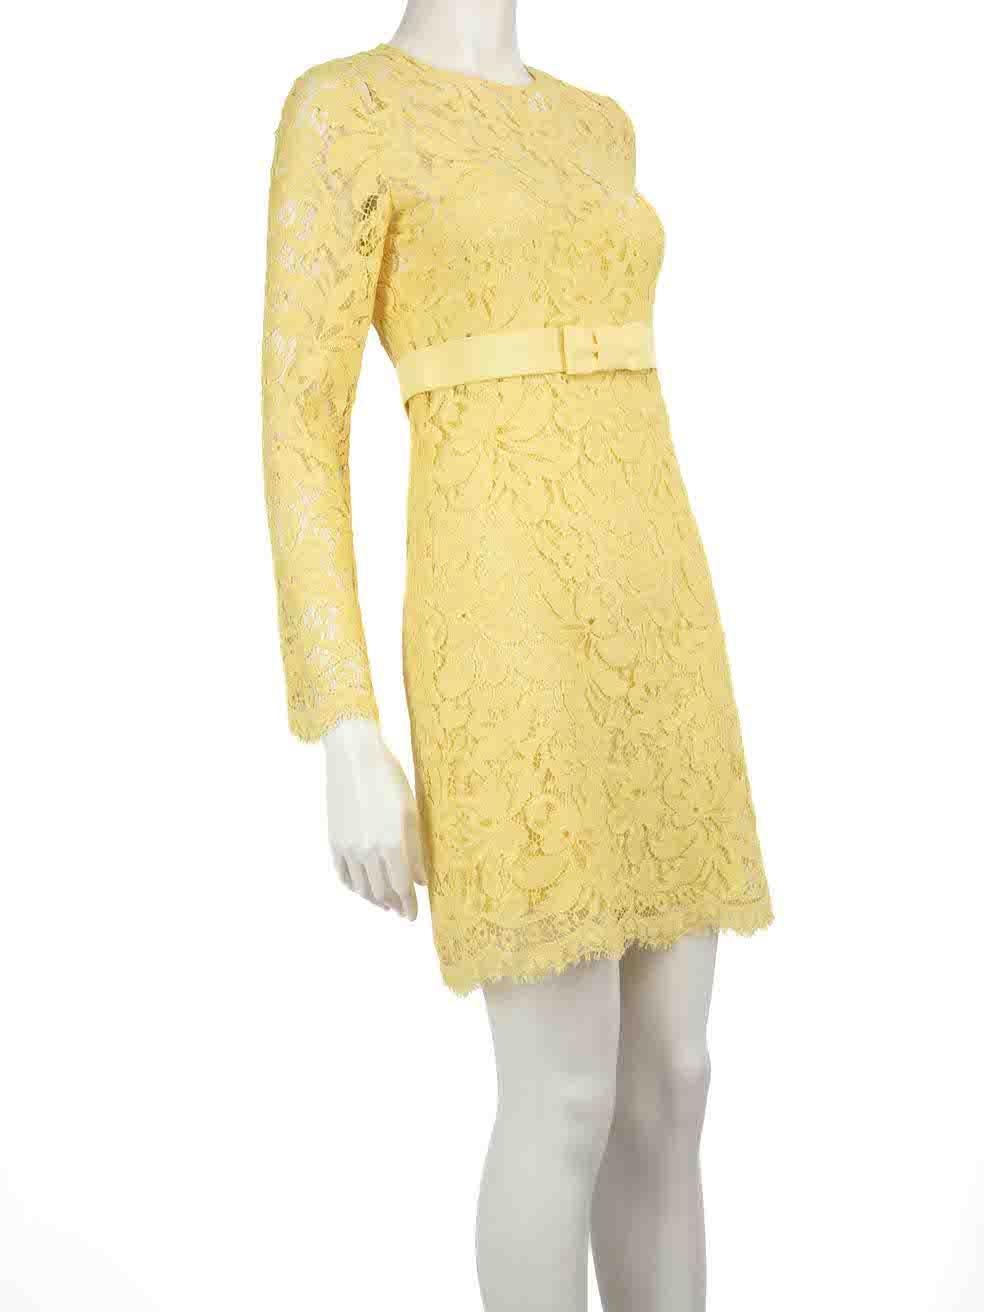 CONDITION is Very good. Hardly any visible wear to dress is evident on this used Temperley London designer resale item.
 
 
 
 Details
 
 
 Yellow
 
 Lace
 
 Dress
 
 Long sleeves
 
 Mini
 
 Round neck
 
 Bow waist accent
 
 Back cut put detail
 
